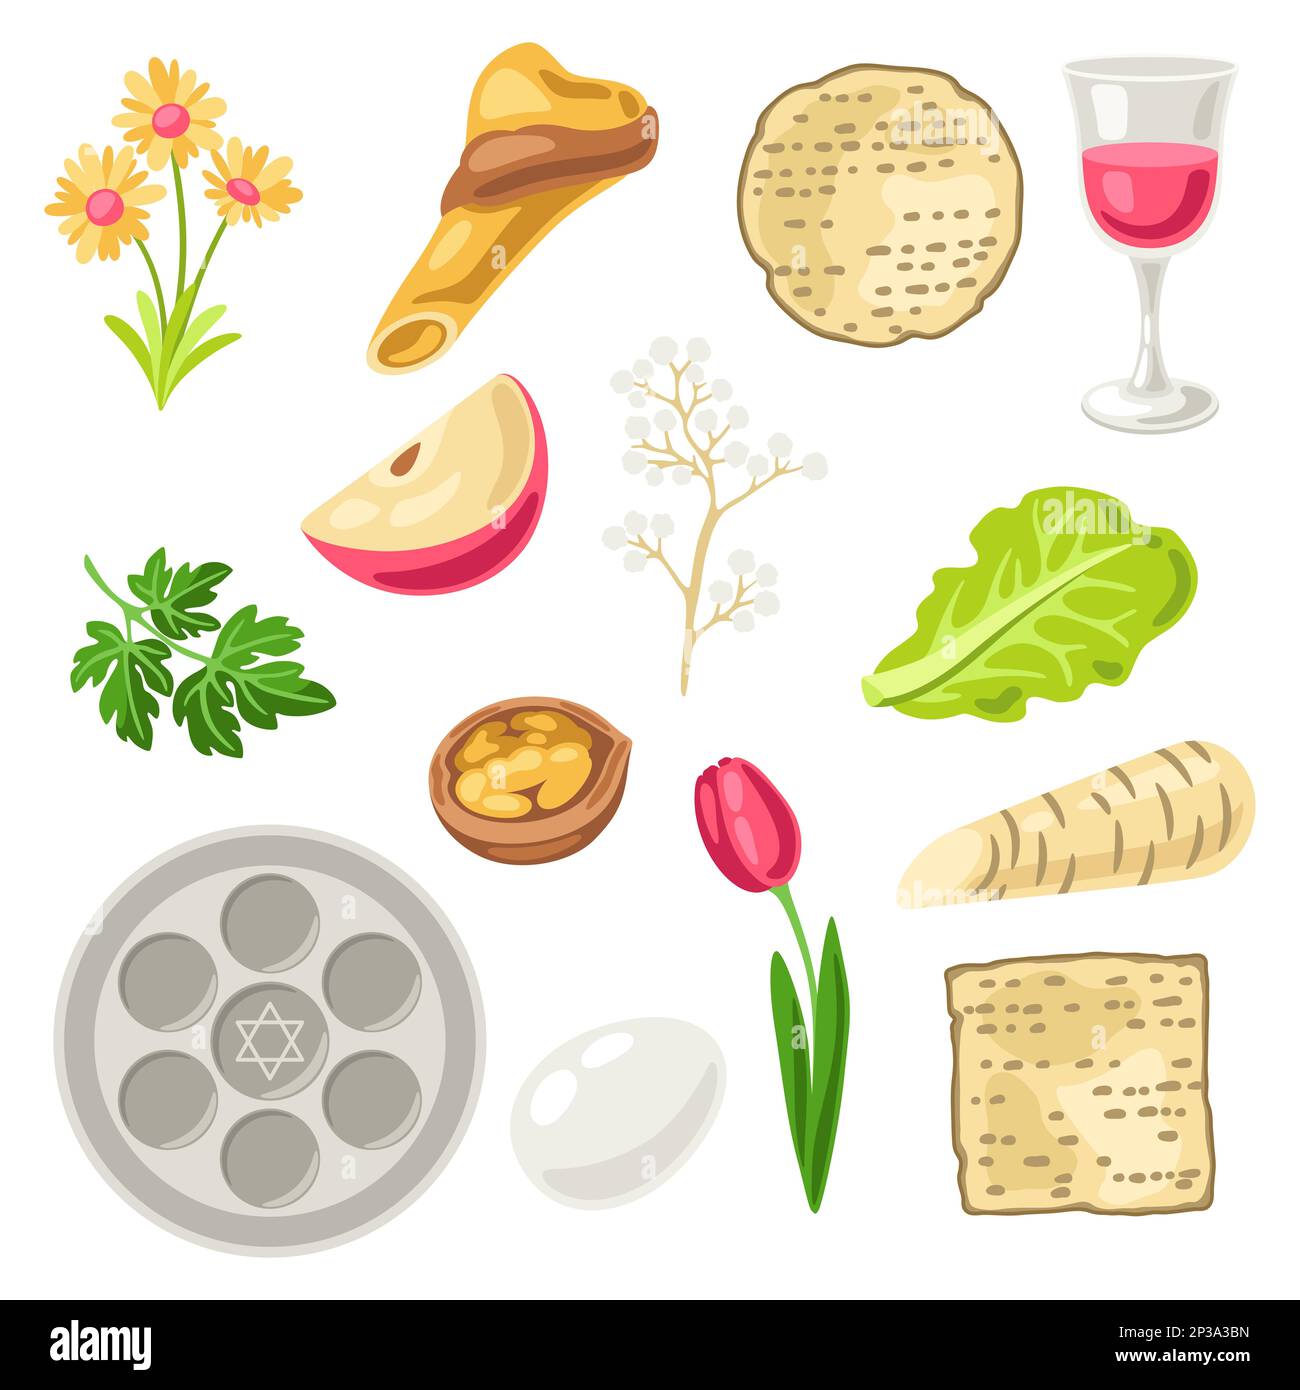 Set of Happy Pesach Jewish Passover plate objects. Holiday celebration traditional symbols. Stock Vector